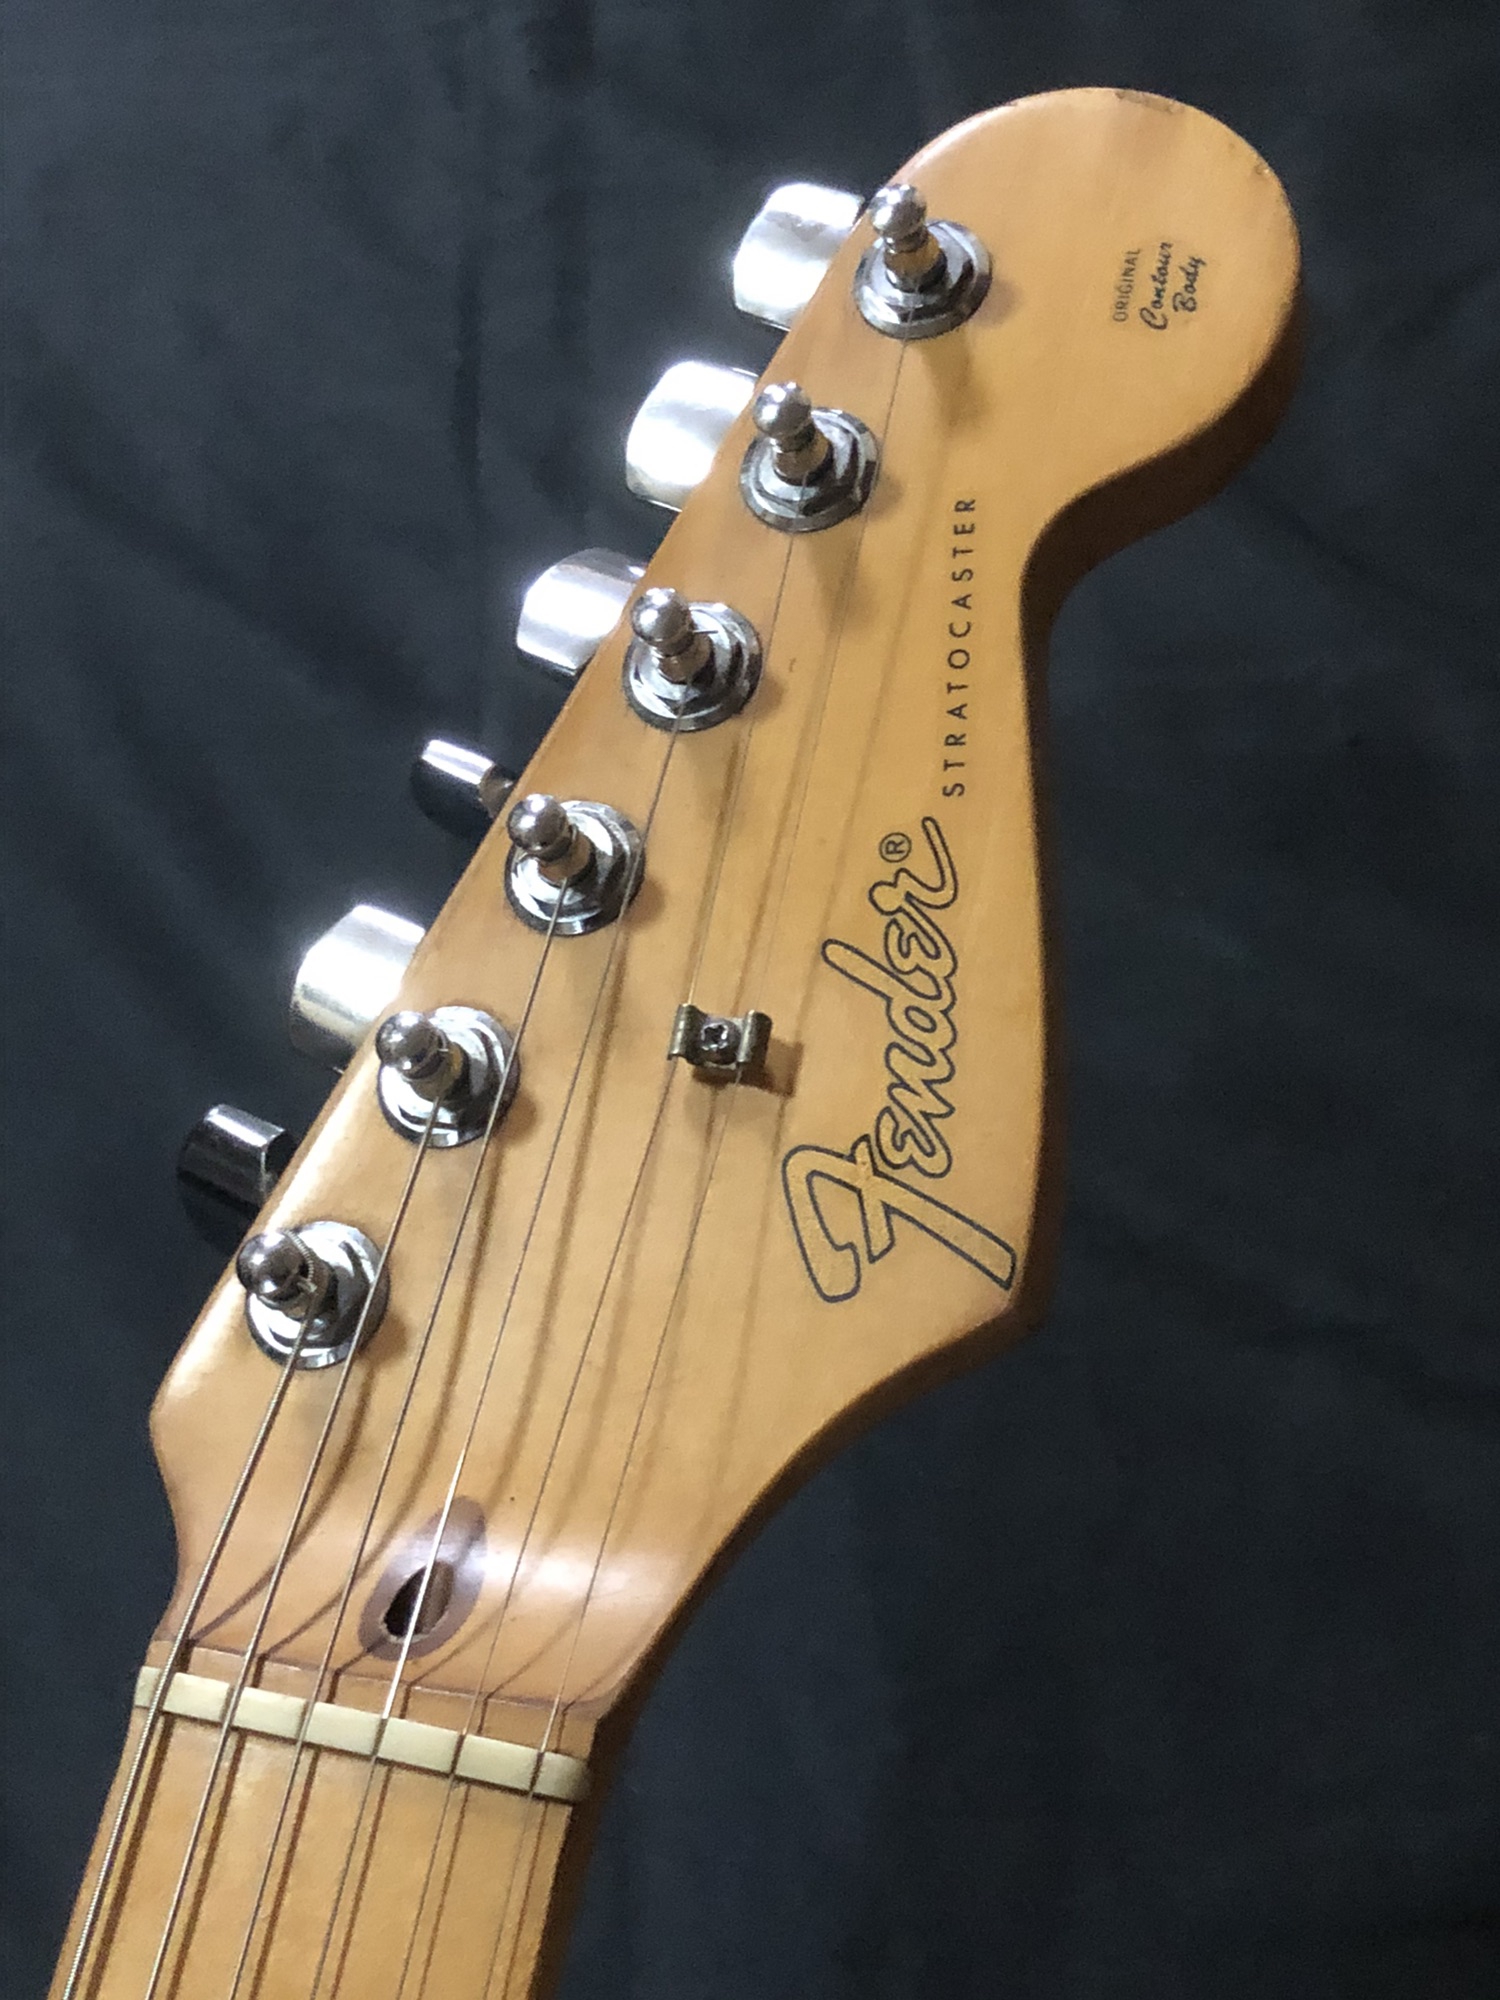 1989 Fender Stratocaster Limiited Edition 〜 Very Rare Guitar